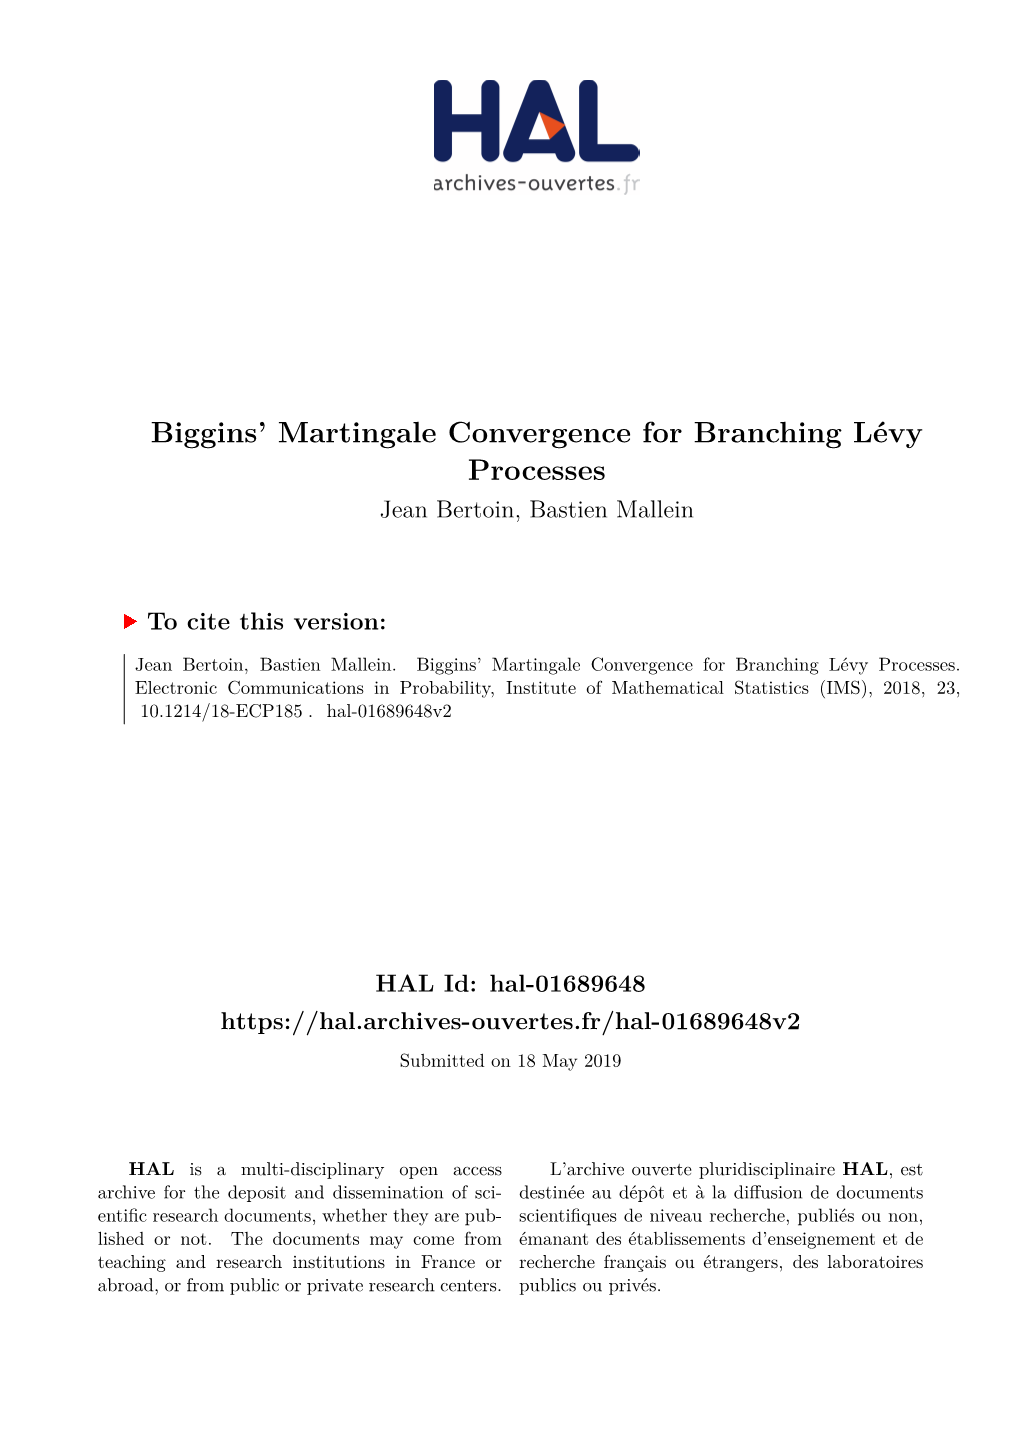 Biggins' Martingale Convergence for Branching Lévy Processes